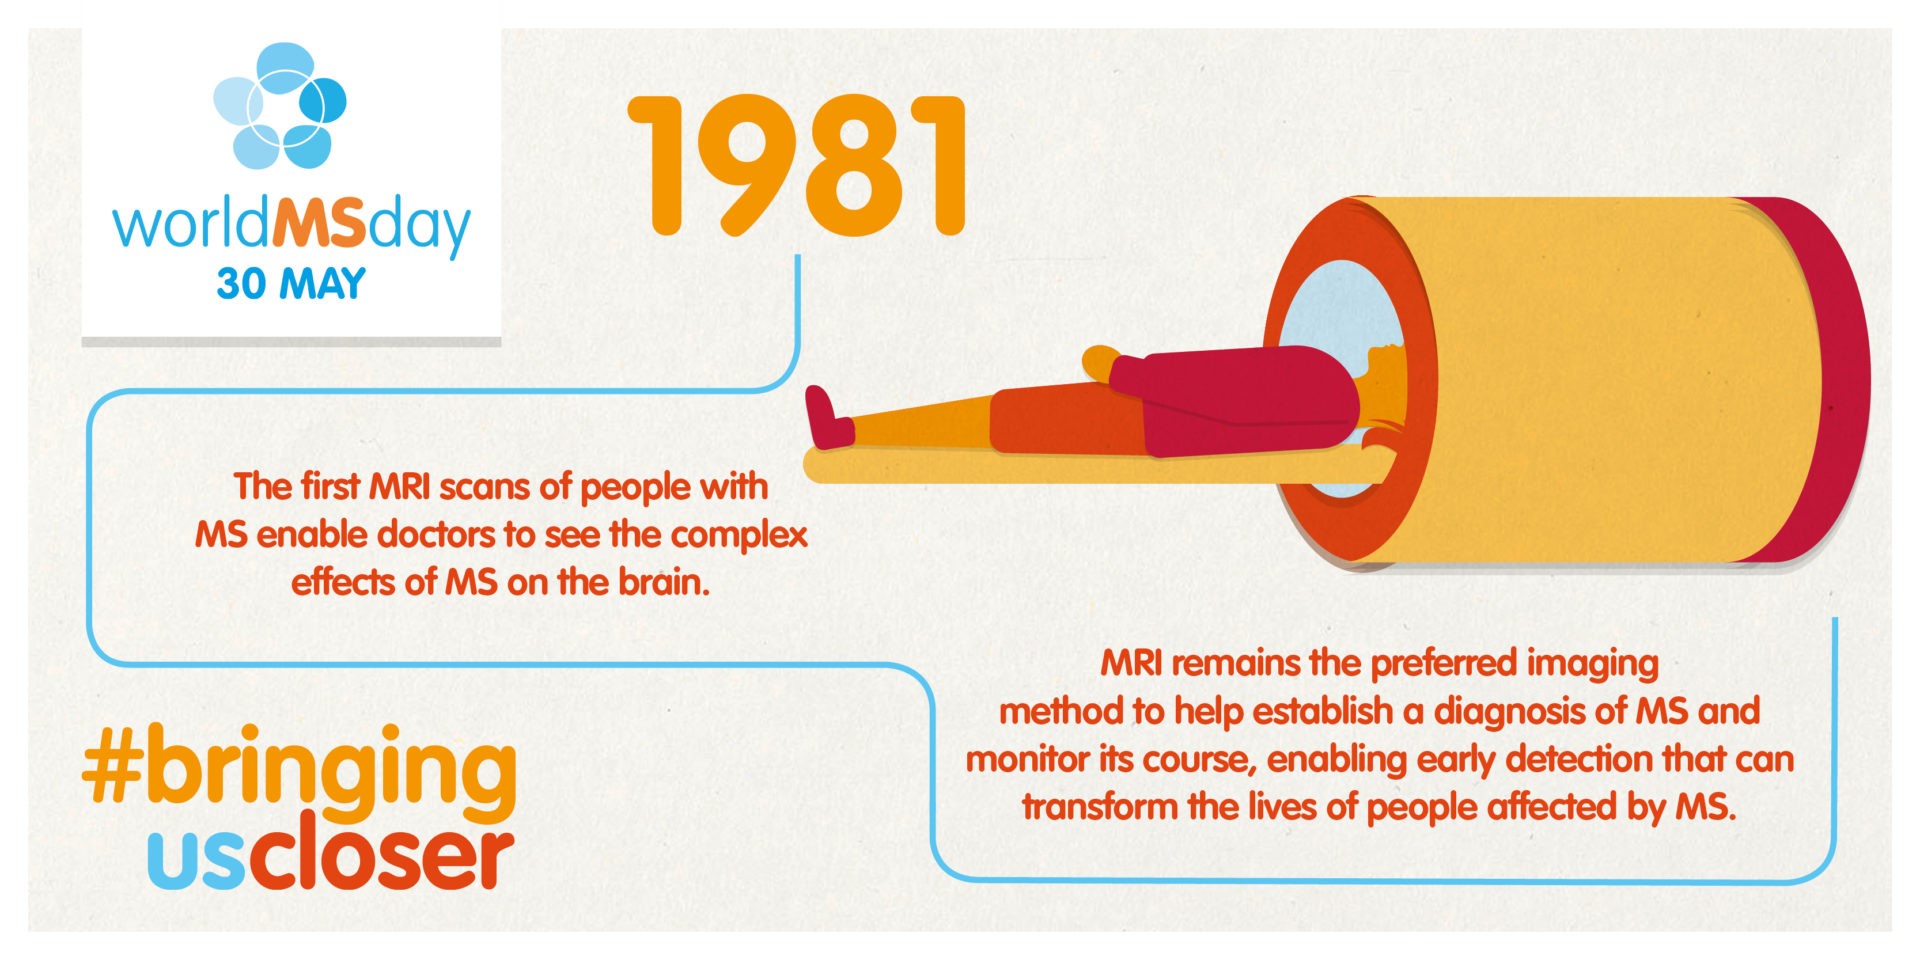 The first MRI scans of people with MS enable doctors to see the complete effects of MS on the brain 